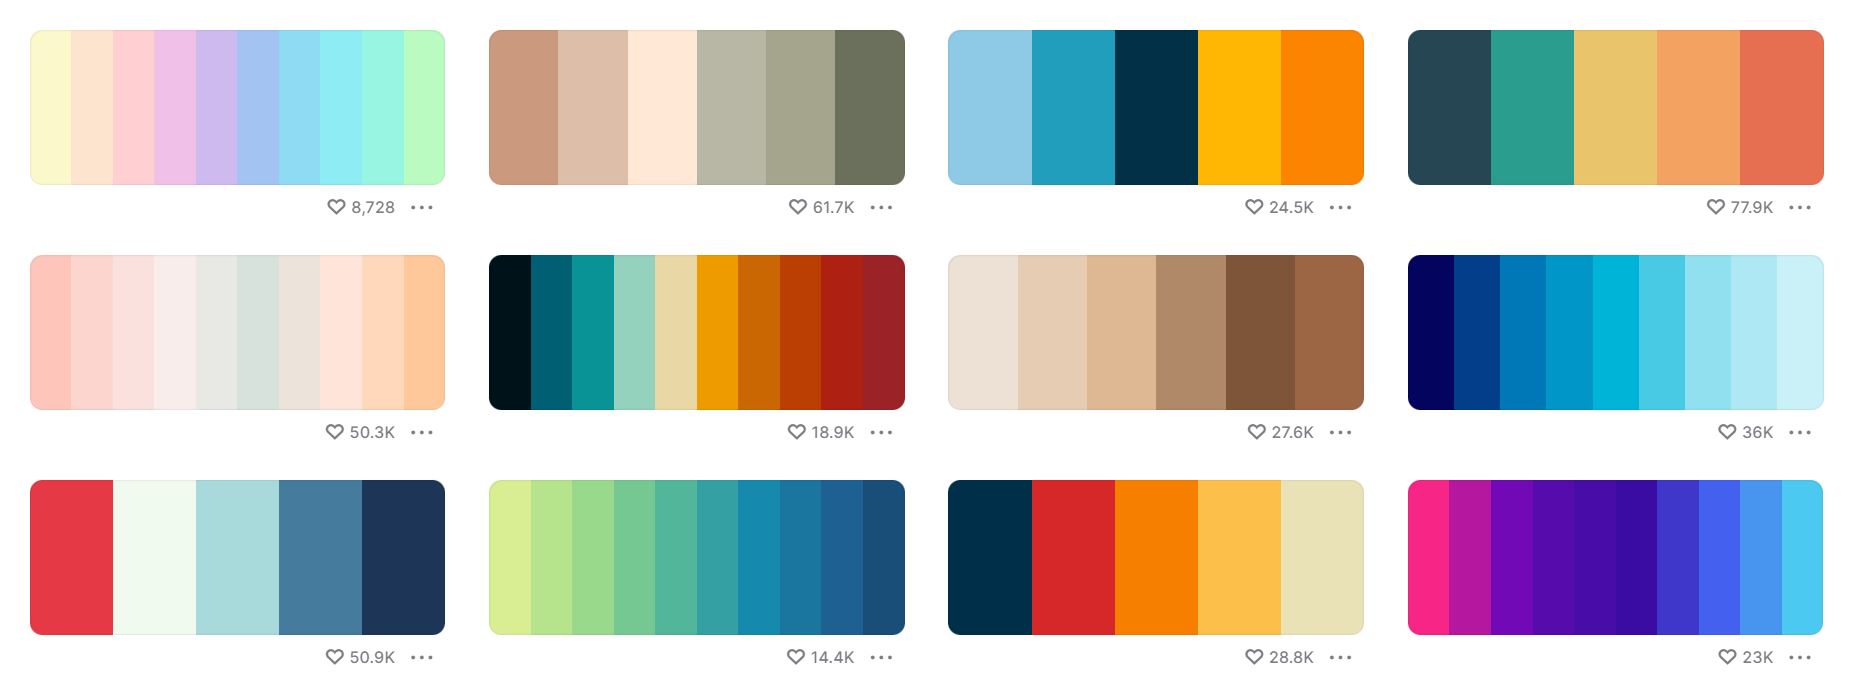 color palettes from coolors.co